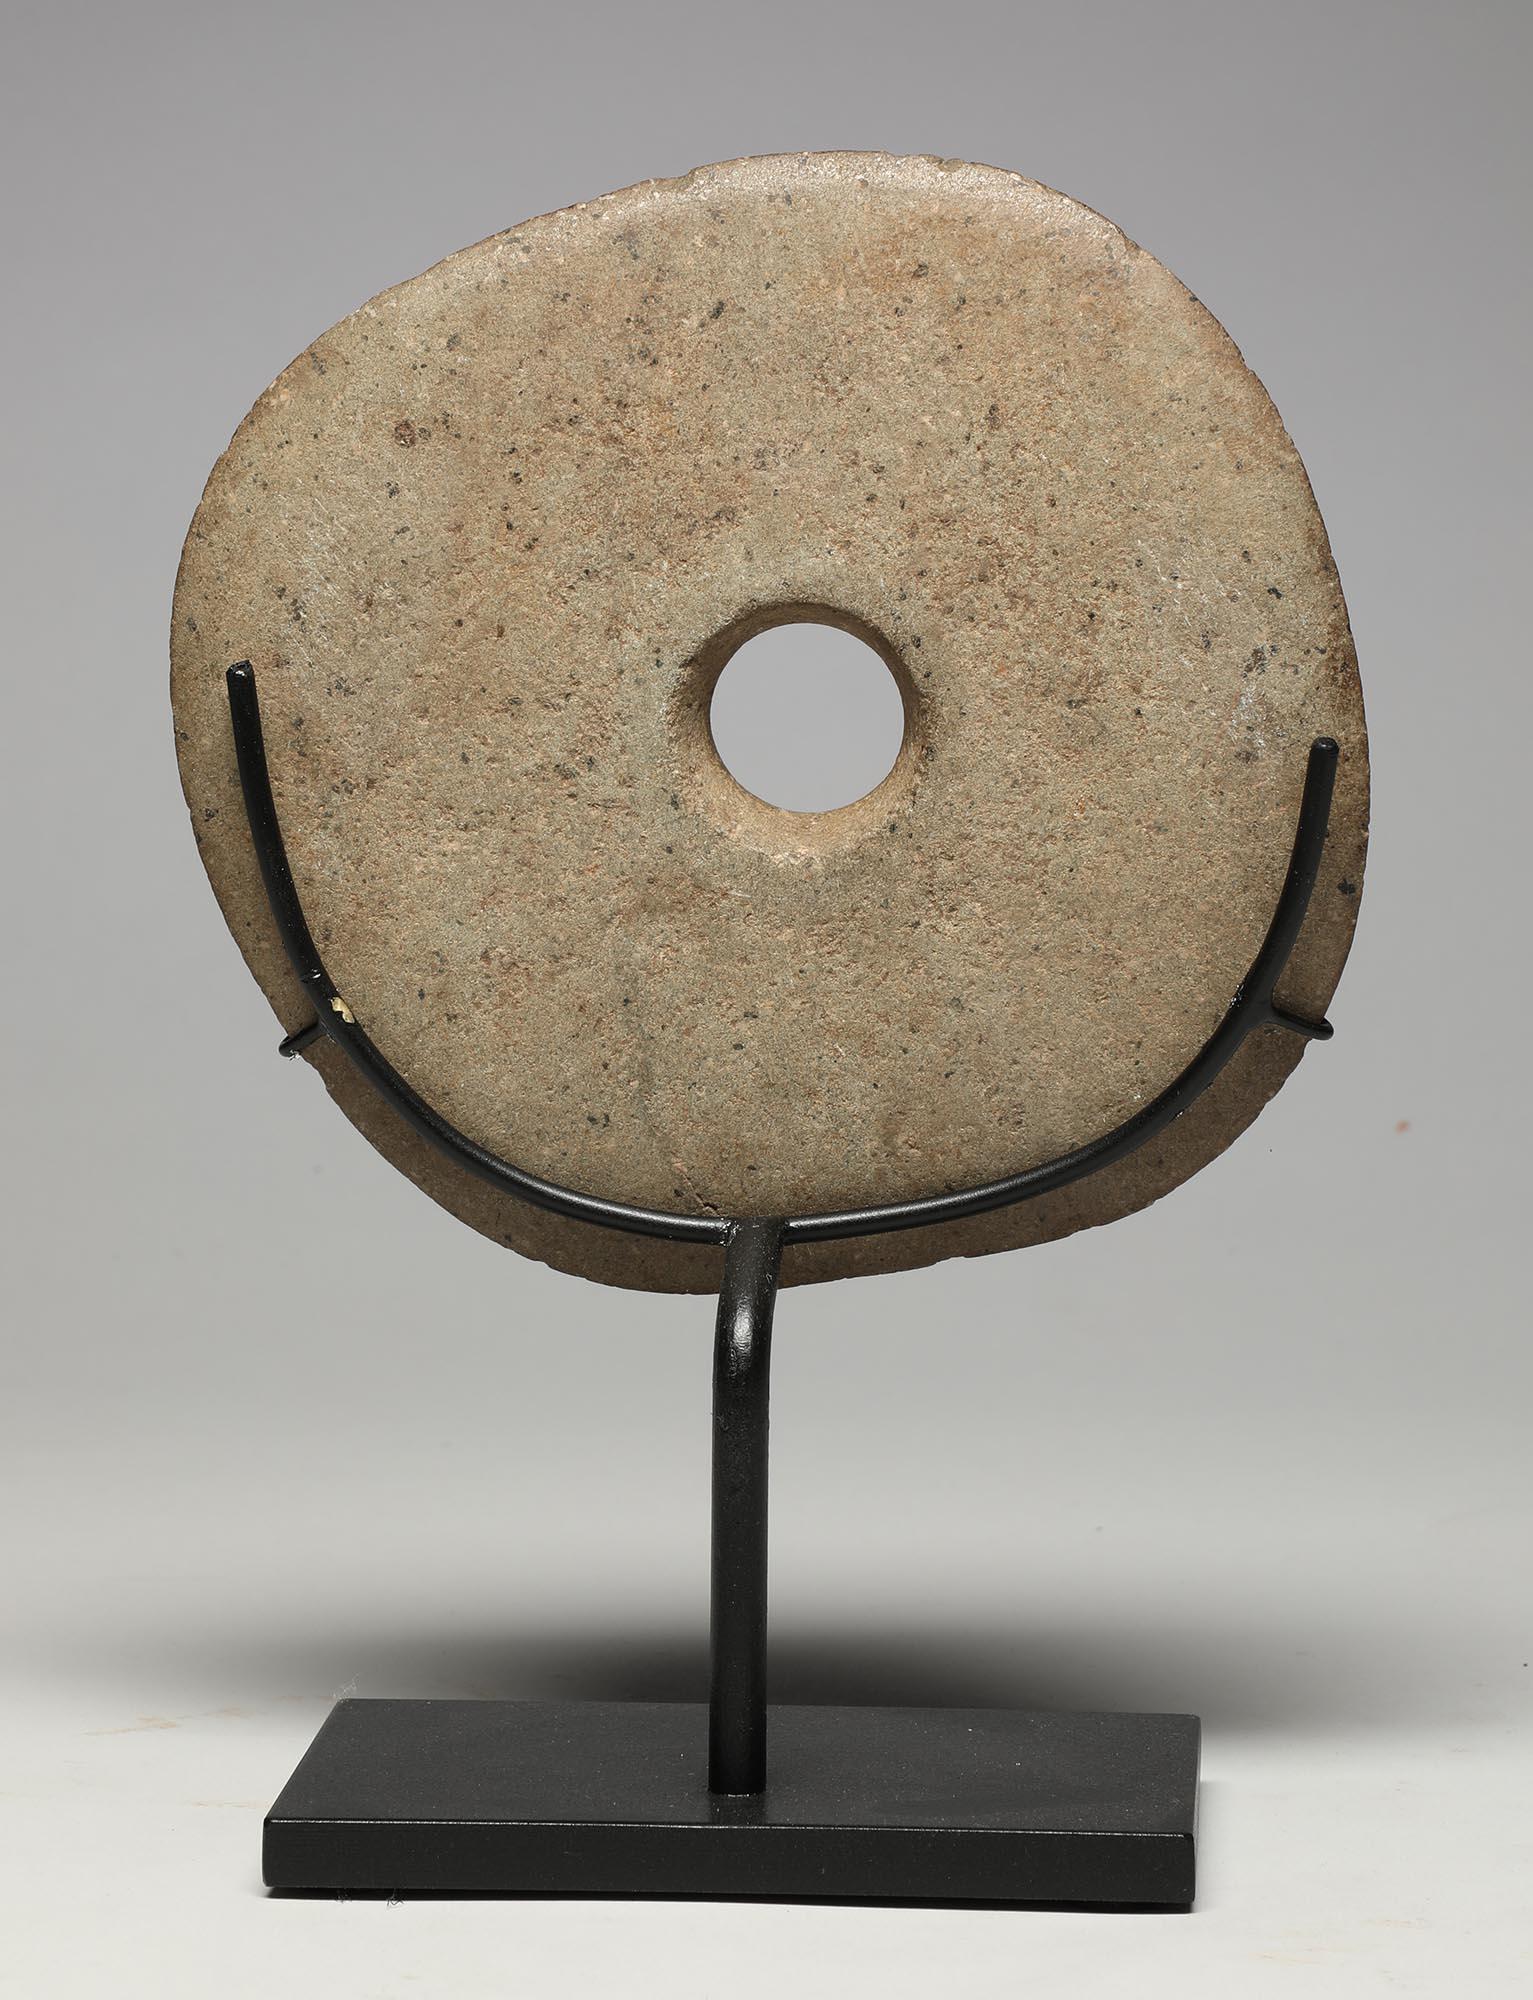 An early pre-contact ground stone disc mace head from New Guinea, with circular hole for attaching to a handle, simple raised shape around hole on one side. Early 20th century or earlier. Very modern and contemporary form with a smooth feel to the